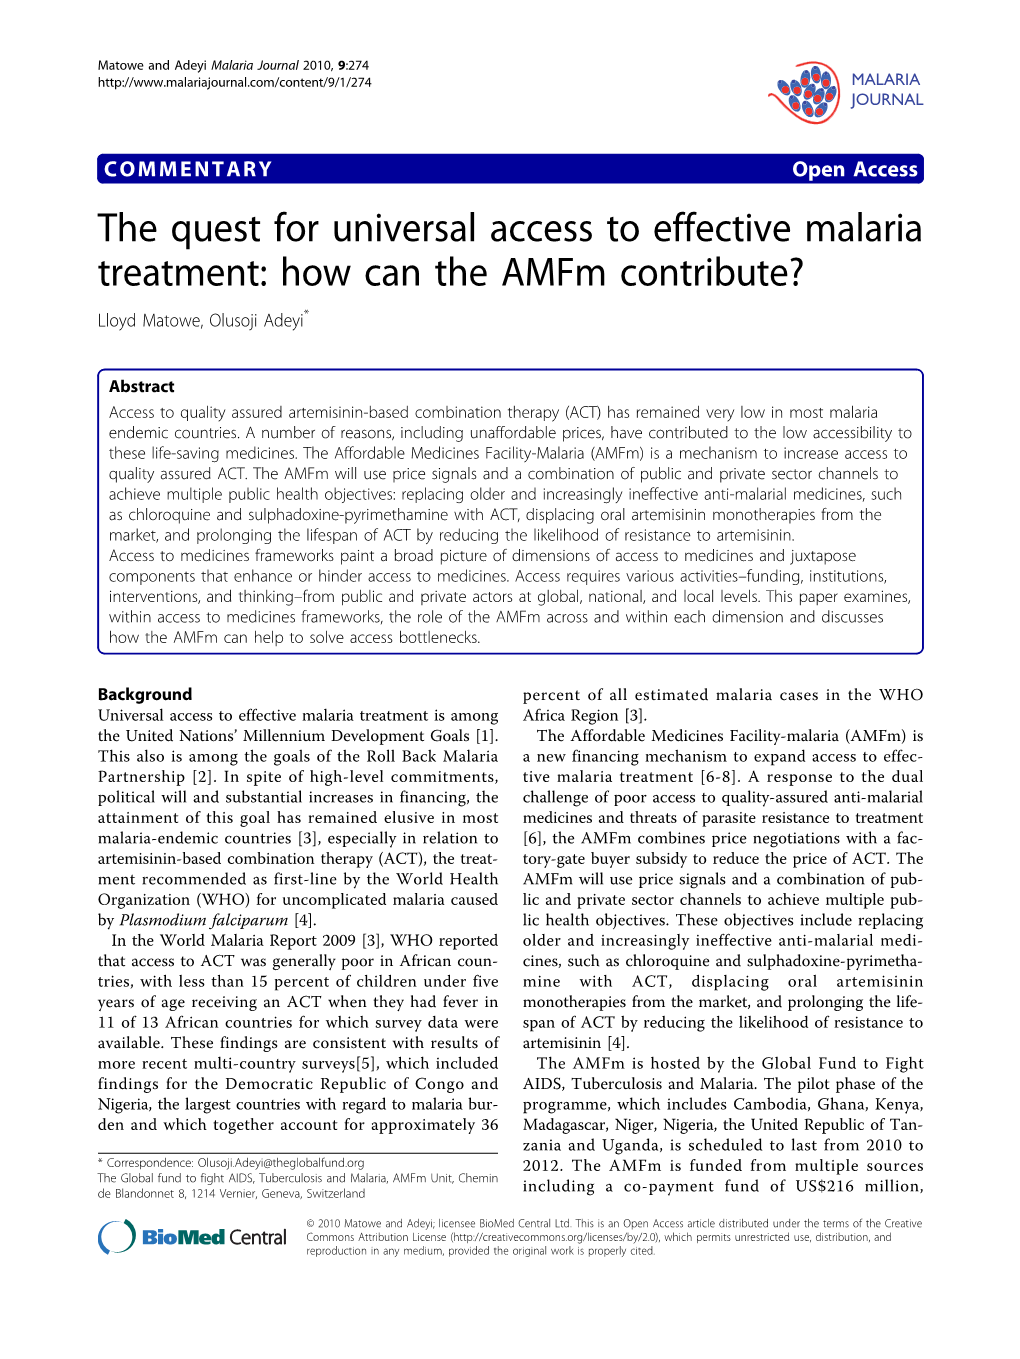 The Quest for Universal Access to Effective Malaria Treatment: How Can the Amfm Contribute? Lloyd Matowe, Olusoji Adeyi*